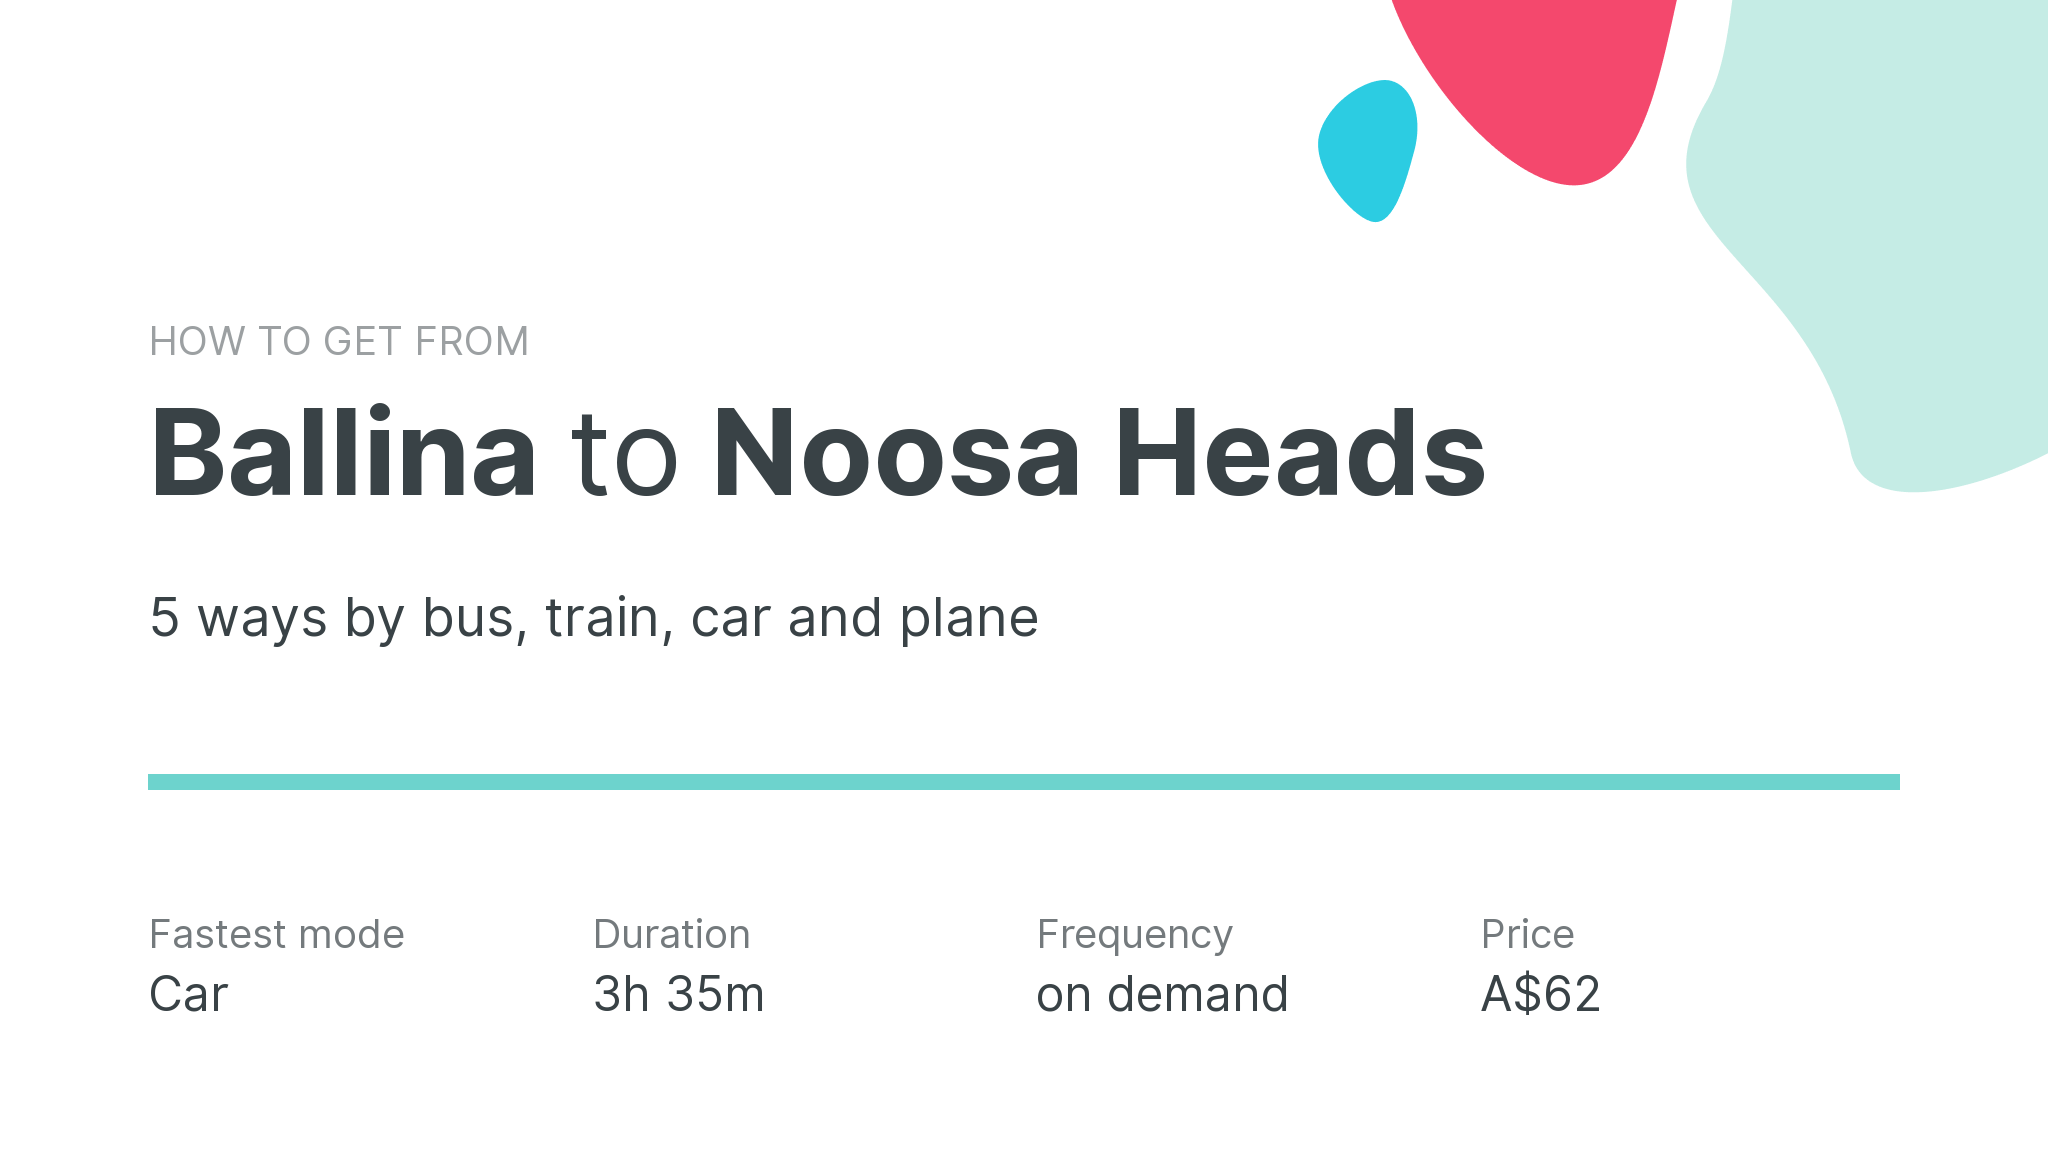 How do I get from Ballina to Noosa Heads